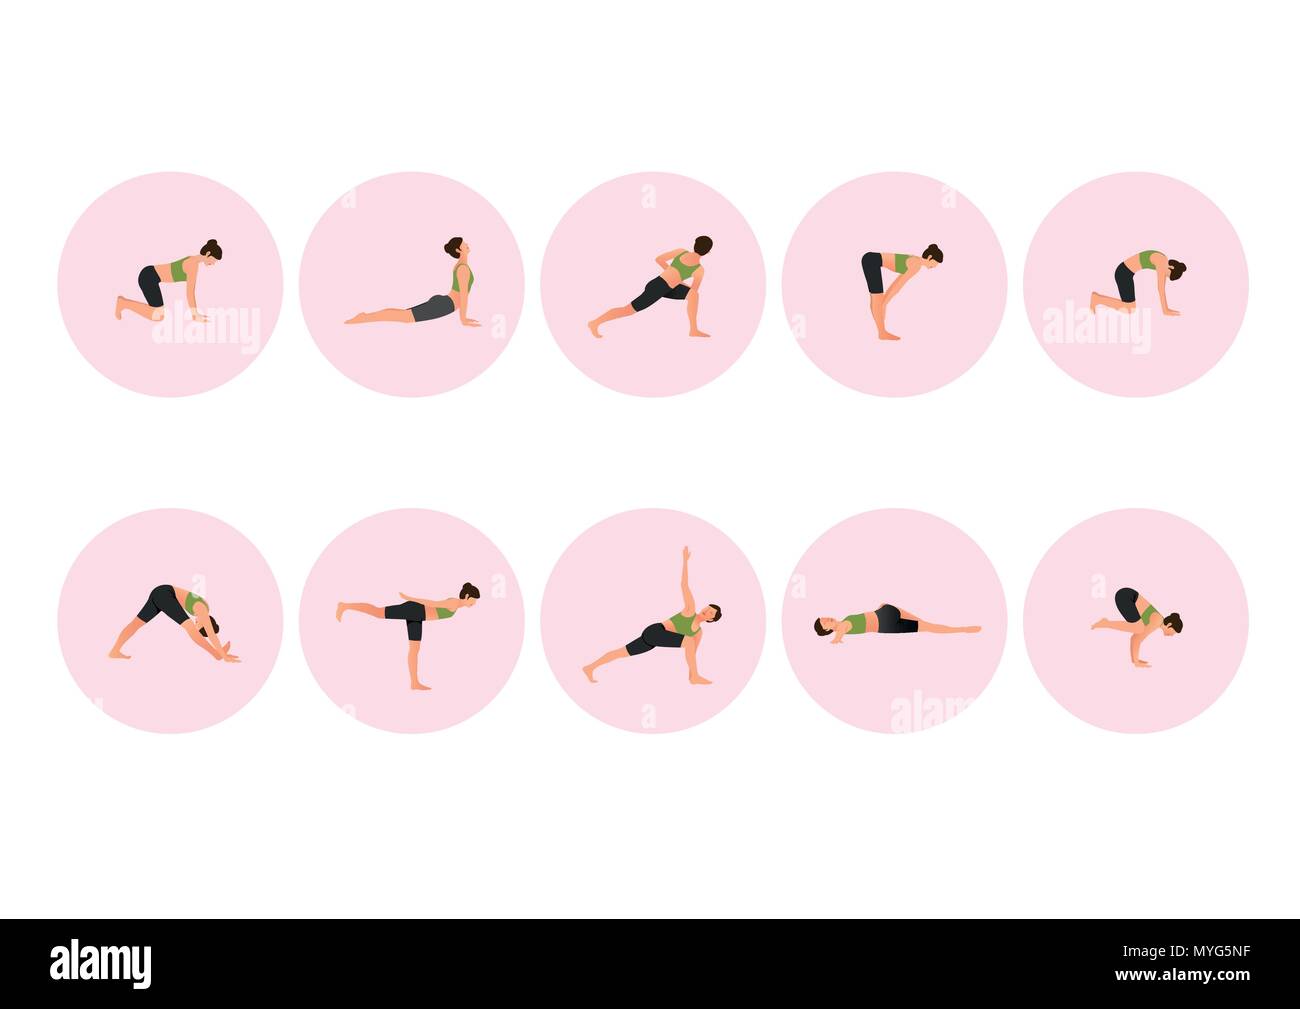 Training people icons set for sport and fitness. Flat style design vector illustration. 003 Stock Vector